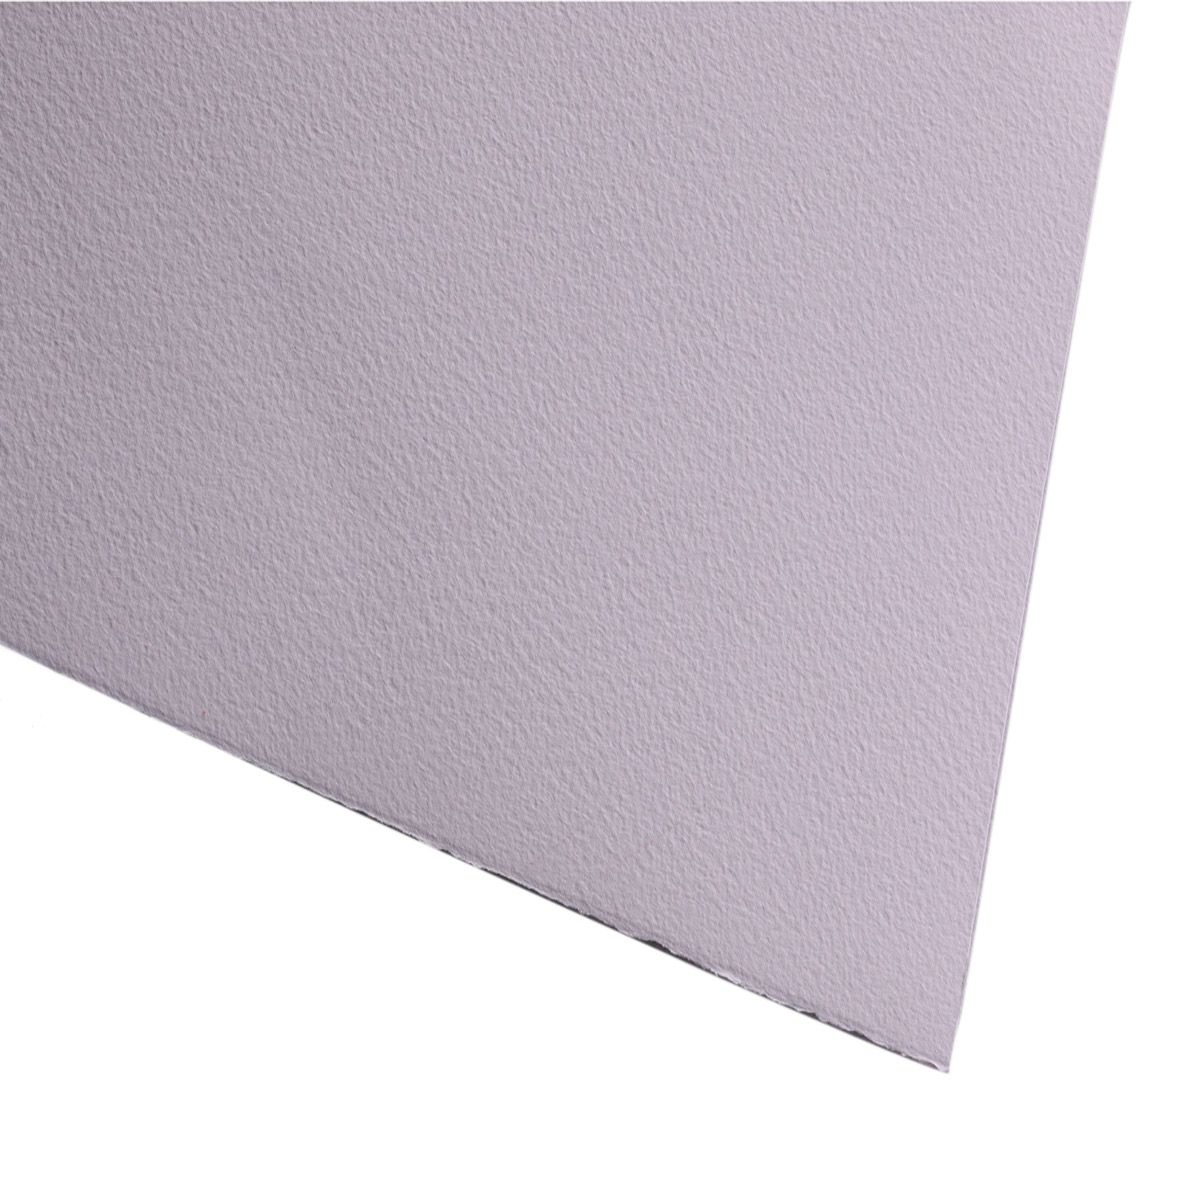 Fabriano Cromia Paper Sheet Pale Gray 19.6" x 25.5"